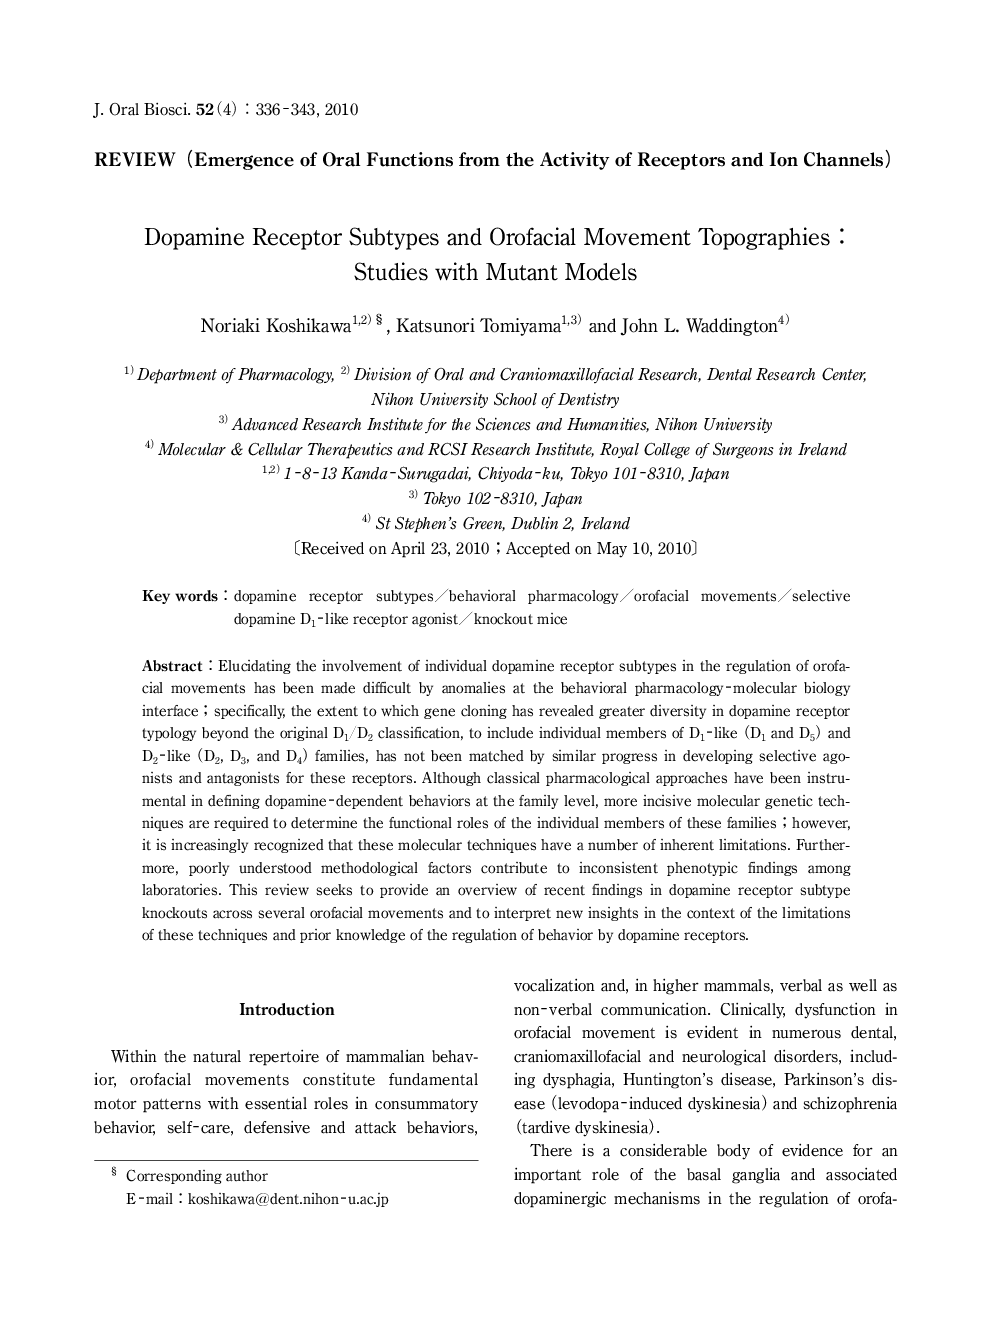 Dopamine Receptor Subtypes and Orofacial Movement Topographies: Studies with Mutant Models